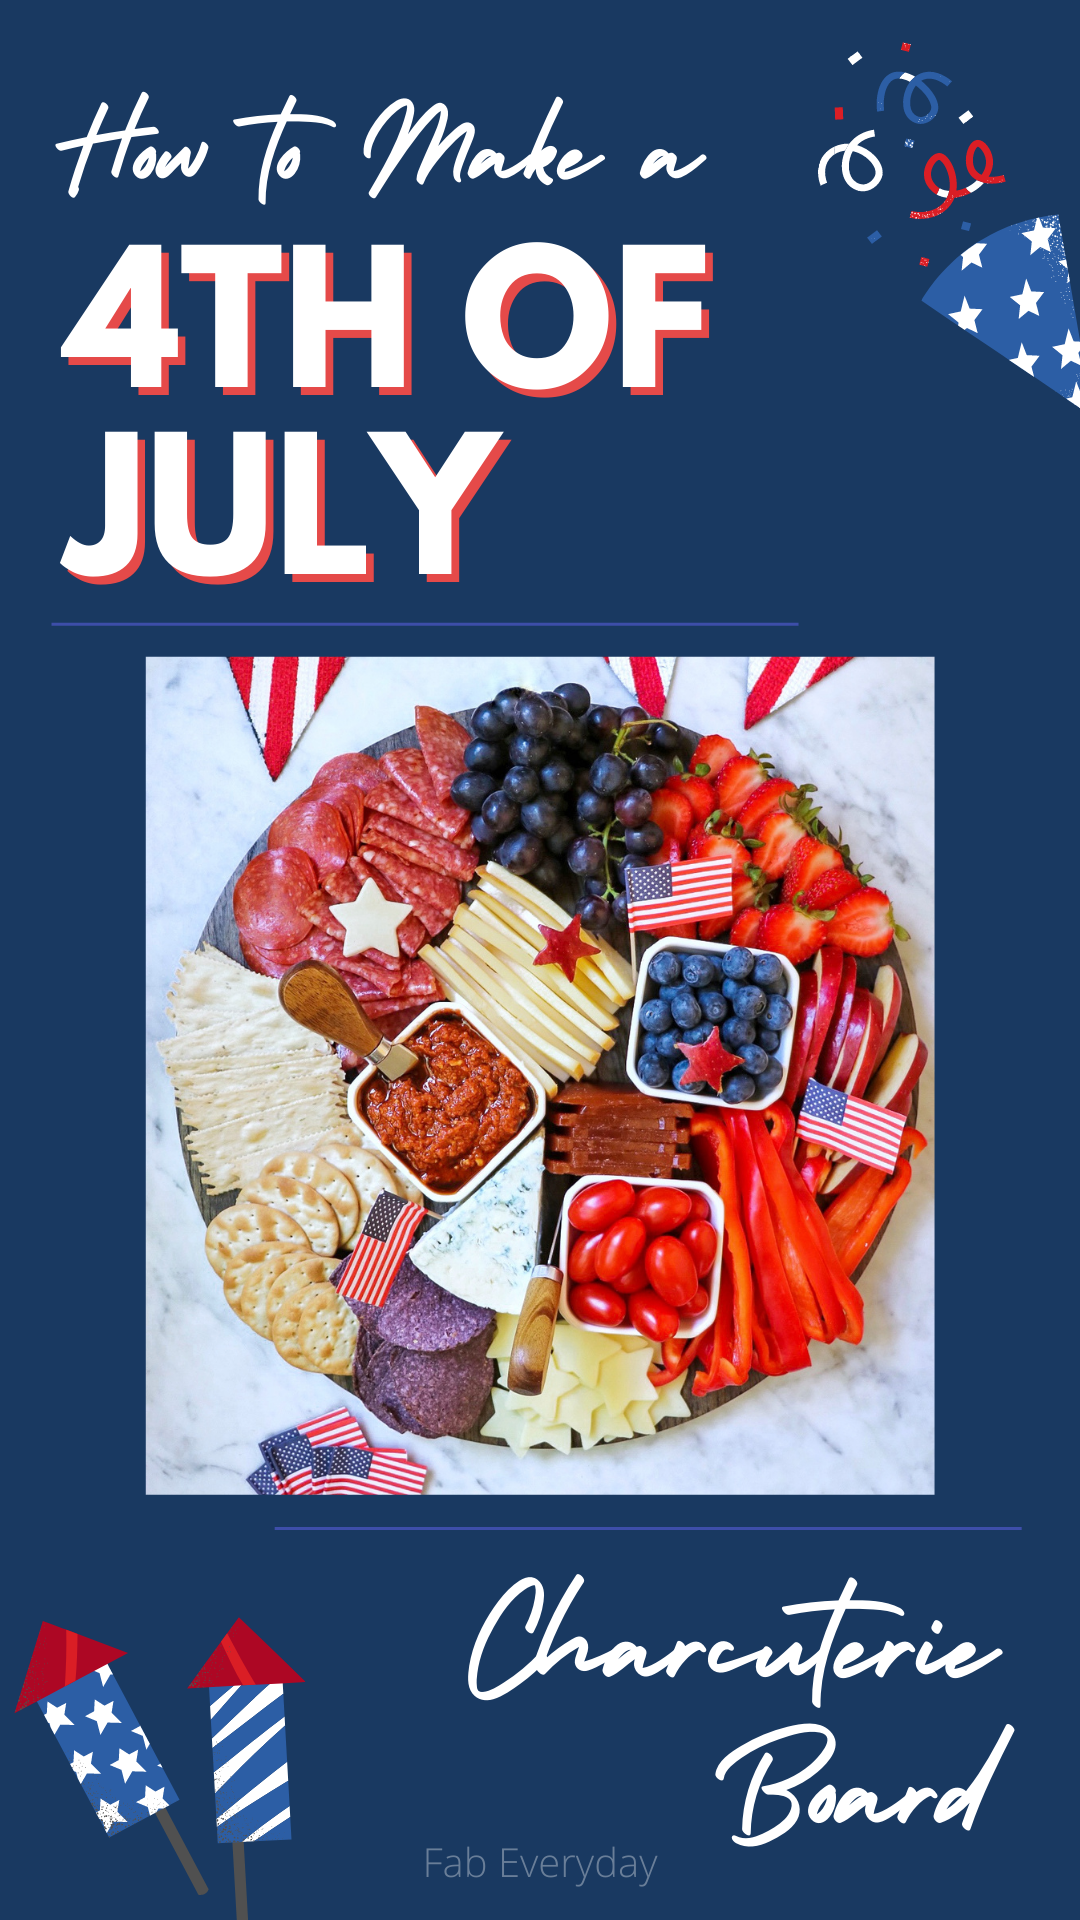 4th of July Charcuterie Board (how to make a patriotic red, white, and blue charcuterie board)